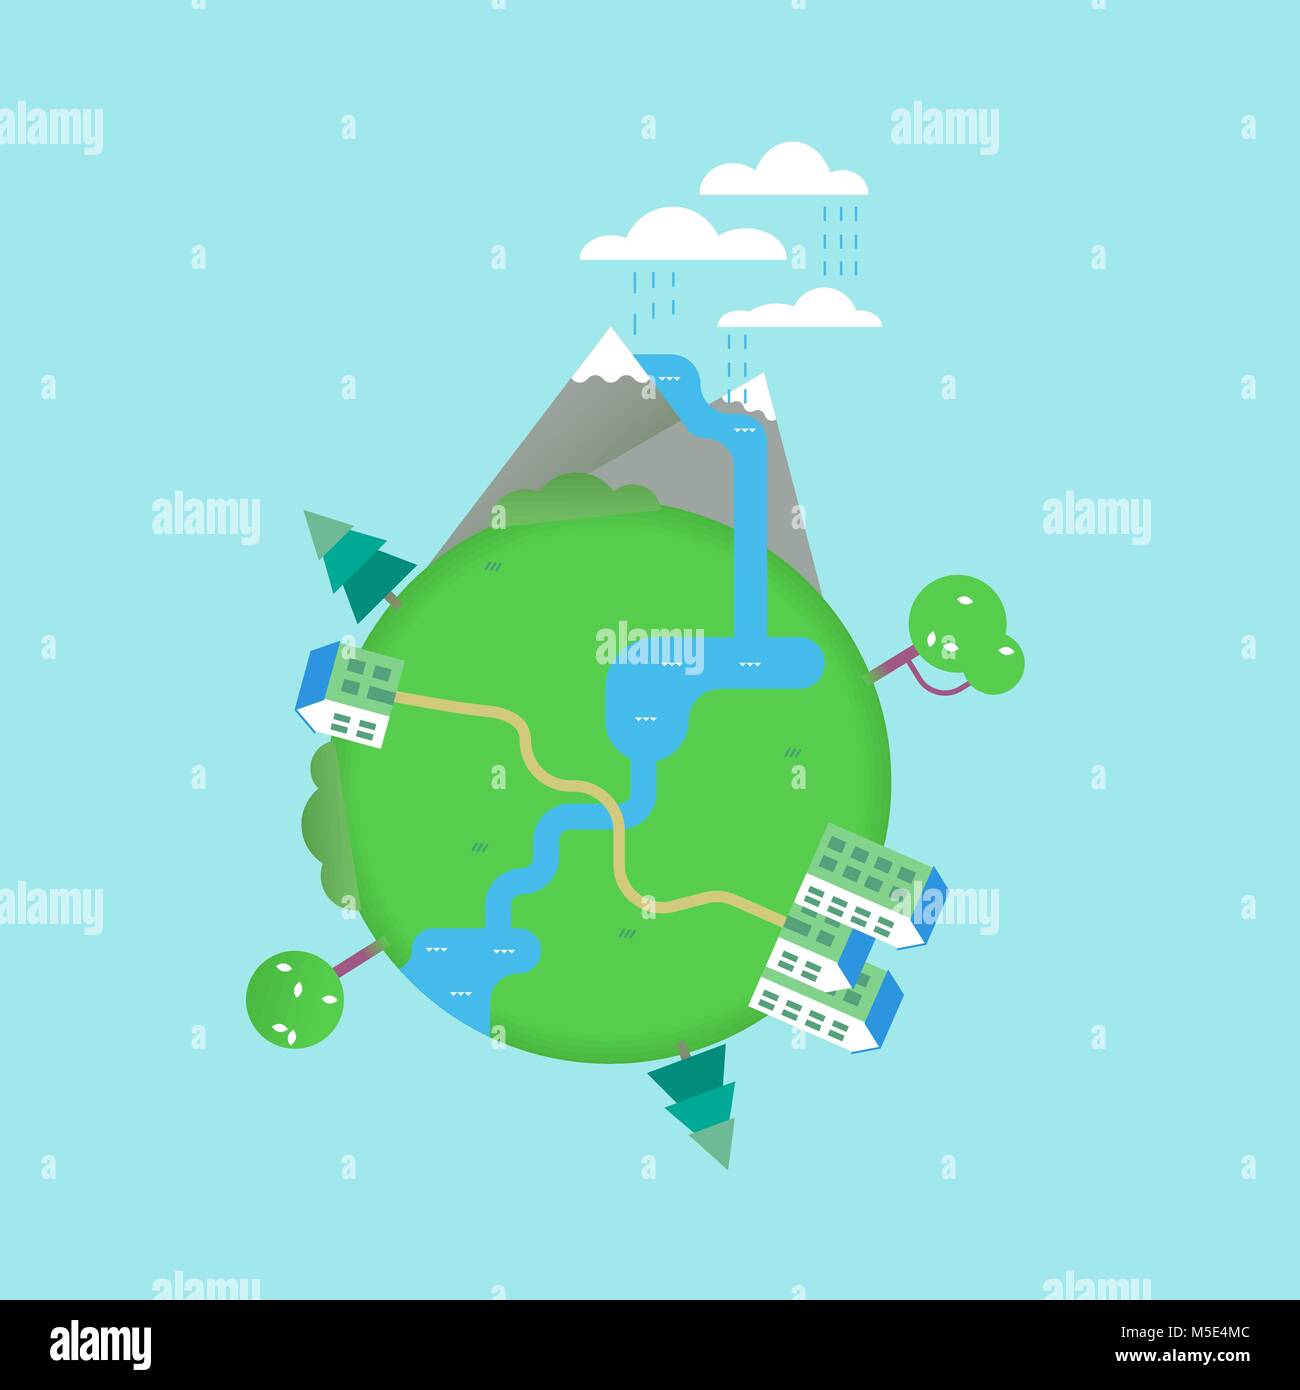 Planet earth concept illustration with nature elements and green landscapes in modern flat art style. Includes river, mountain, houses, trees. EPS10 v Stock Vector